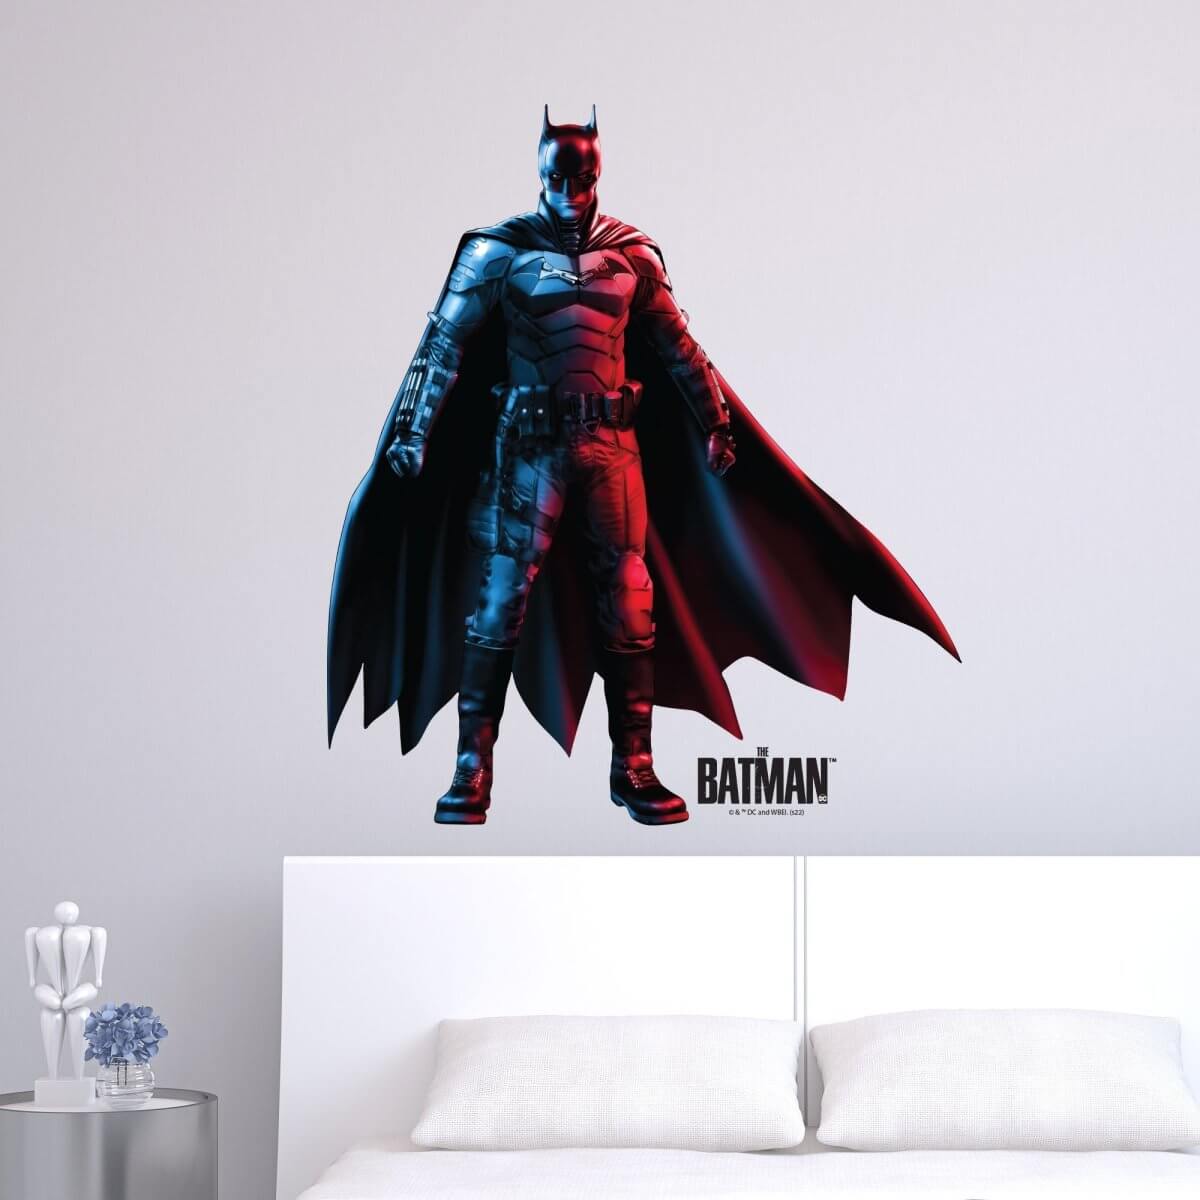 The Batman 2022 Combat Armor Decal Wall Neon Licensed